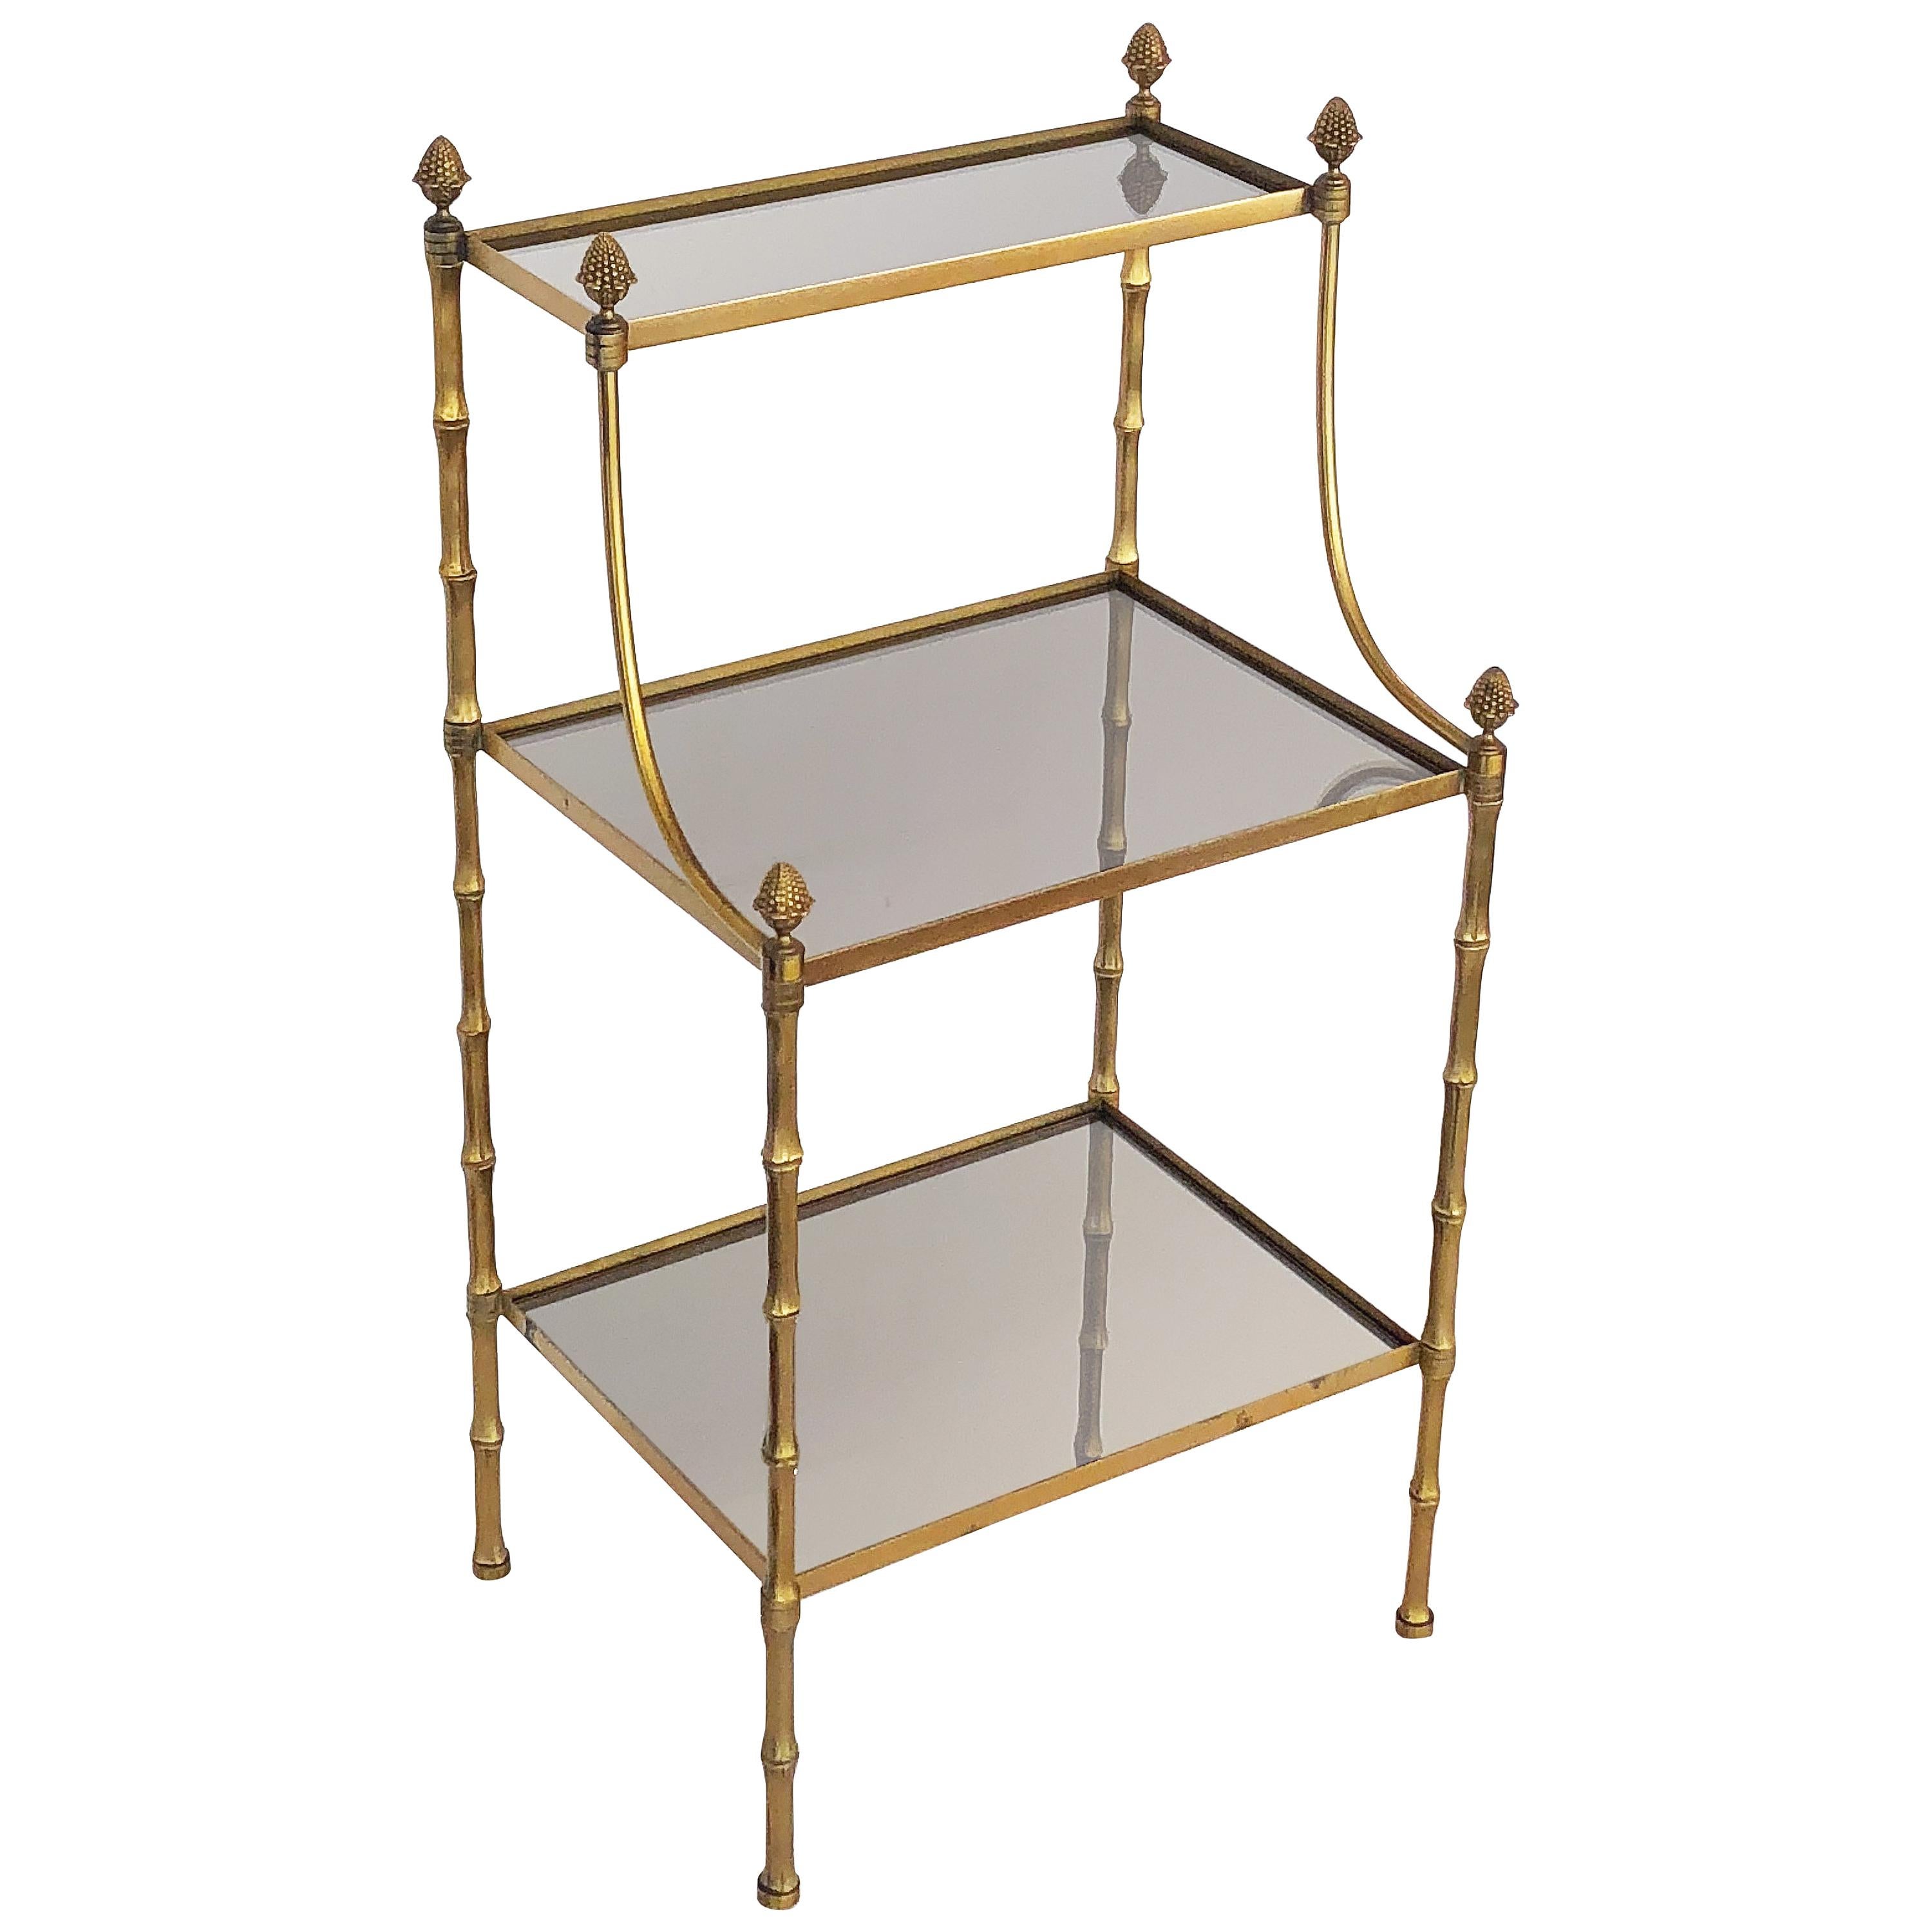 French Mirrored Étagère or Shelves of Brass with Faux Bamboo Design